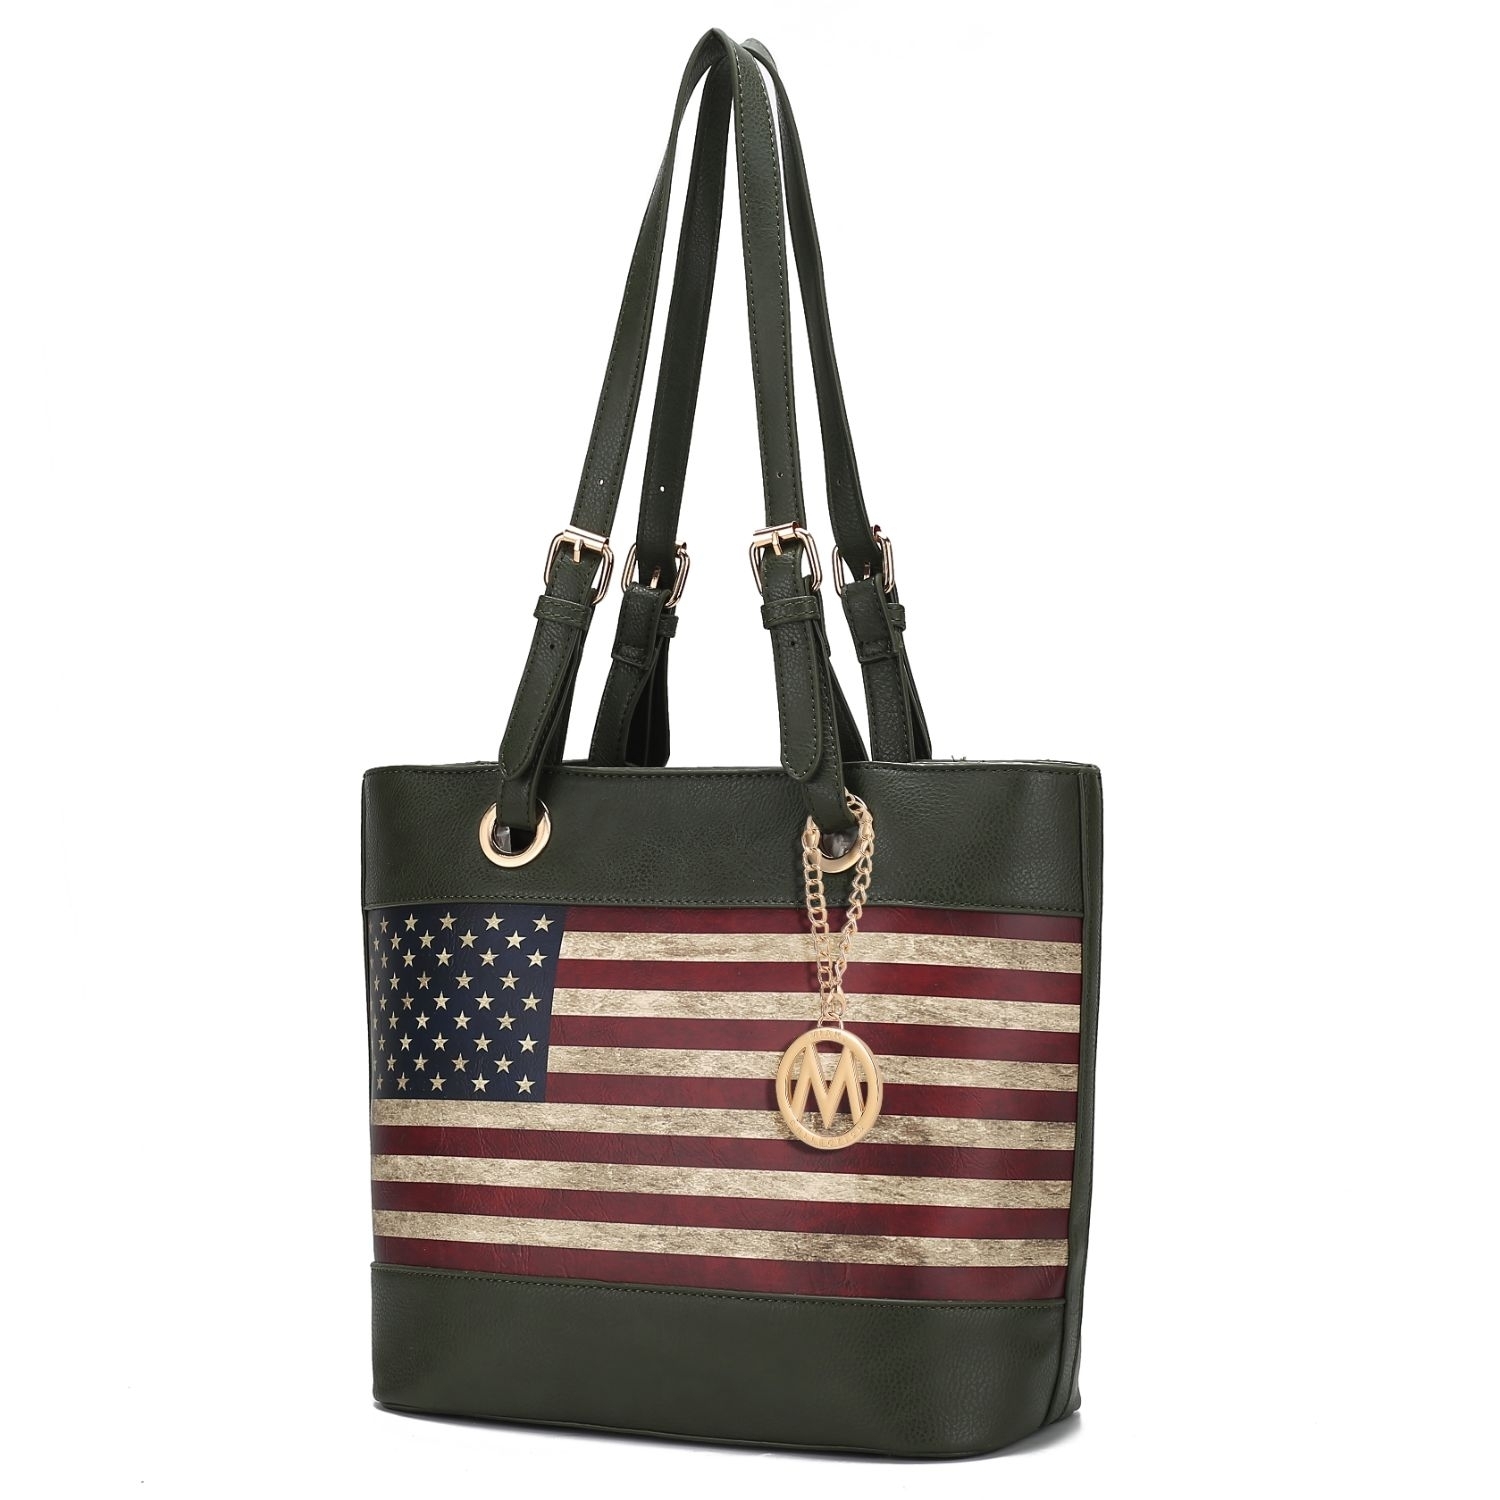 MKF Collection Vera Vegan Leather Patriotic Flag Pattern Women's Tote Bag By Mia K - Green